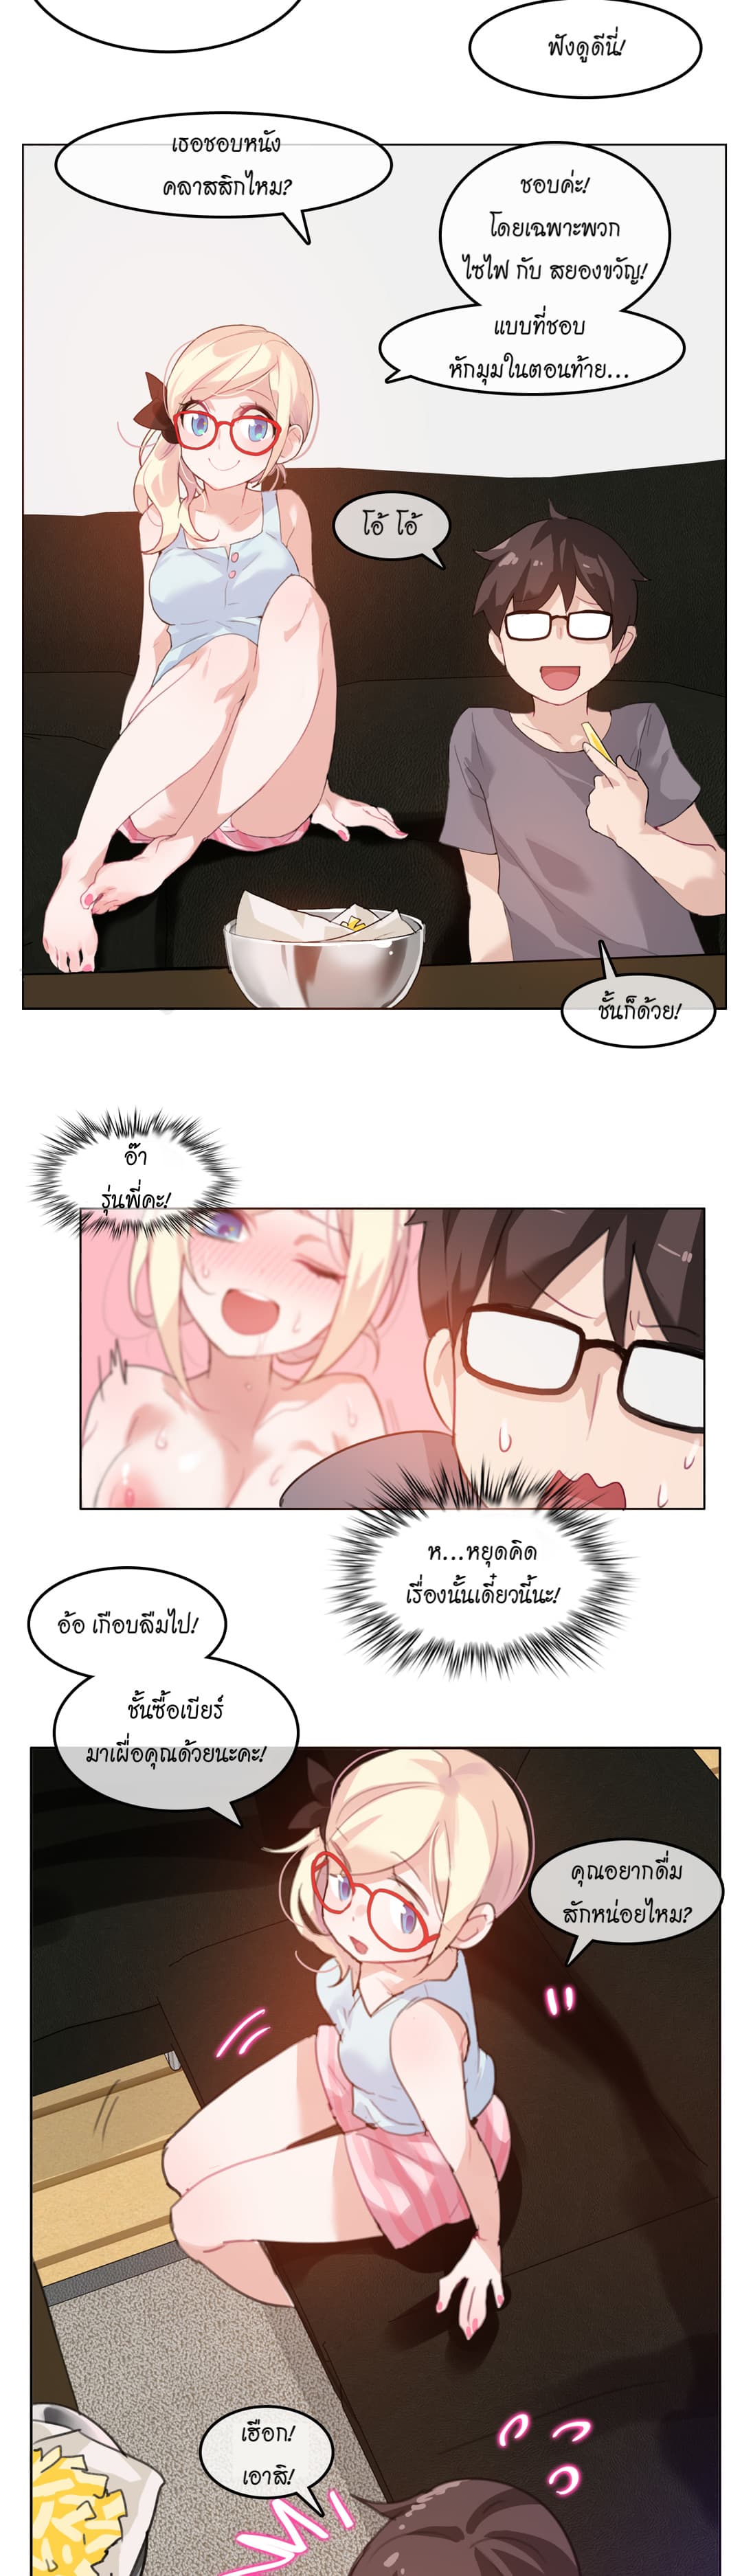 A Pervert’s Daily Life 4 (15)